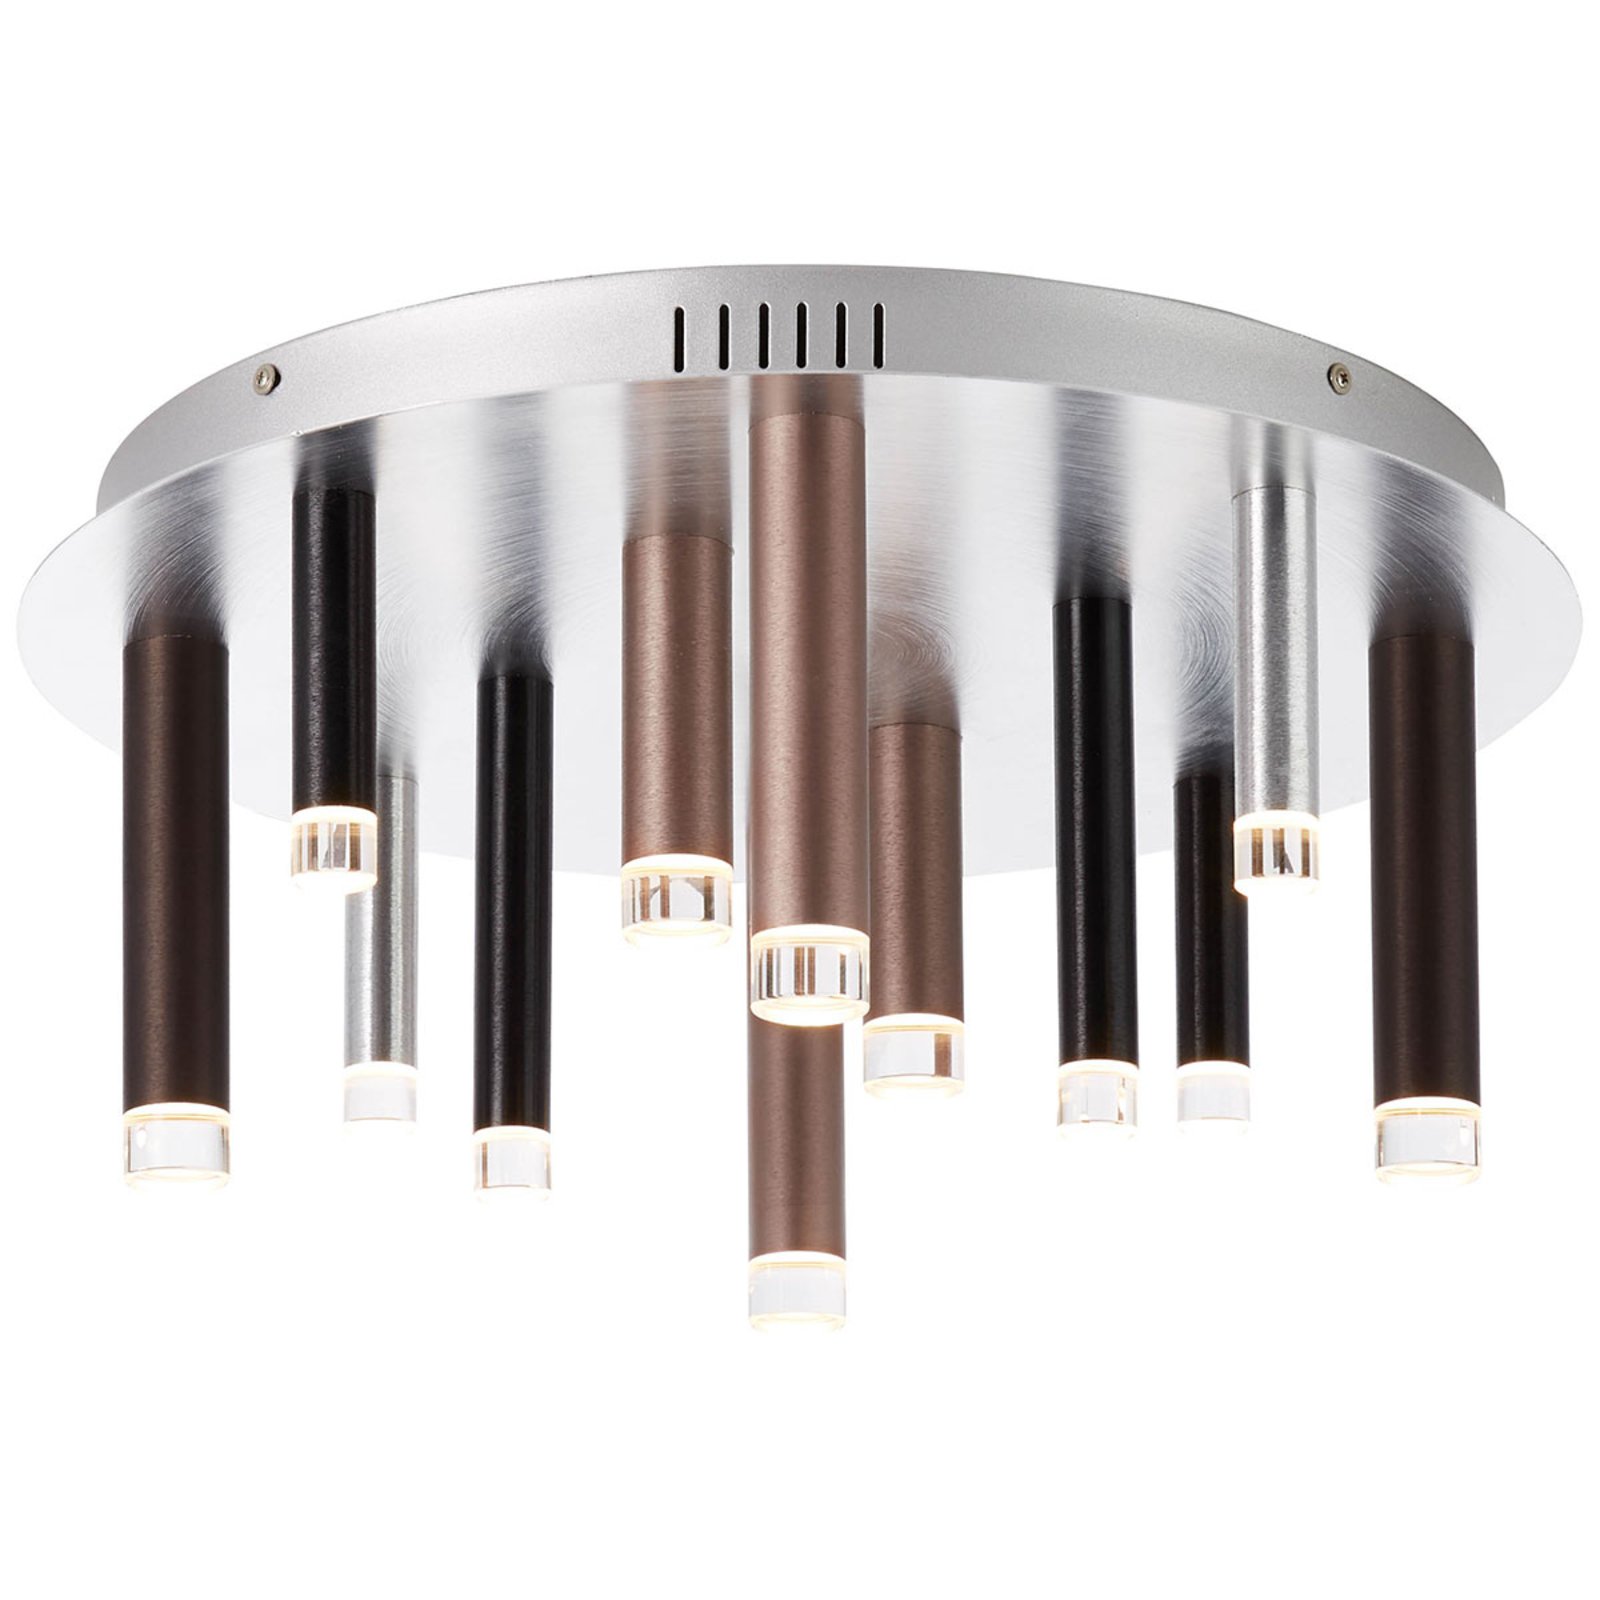 Plafonnier LED Cembalo dimmable 12 lampes